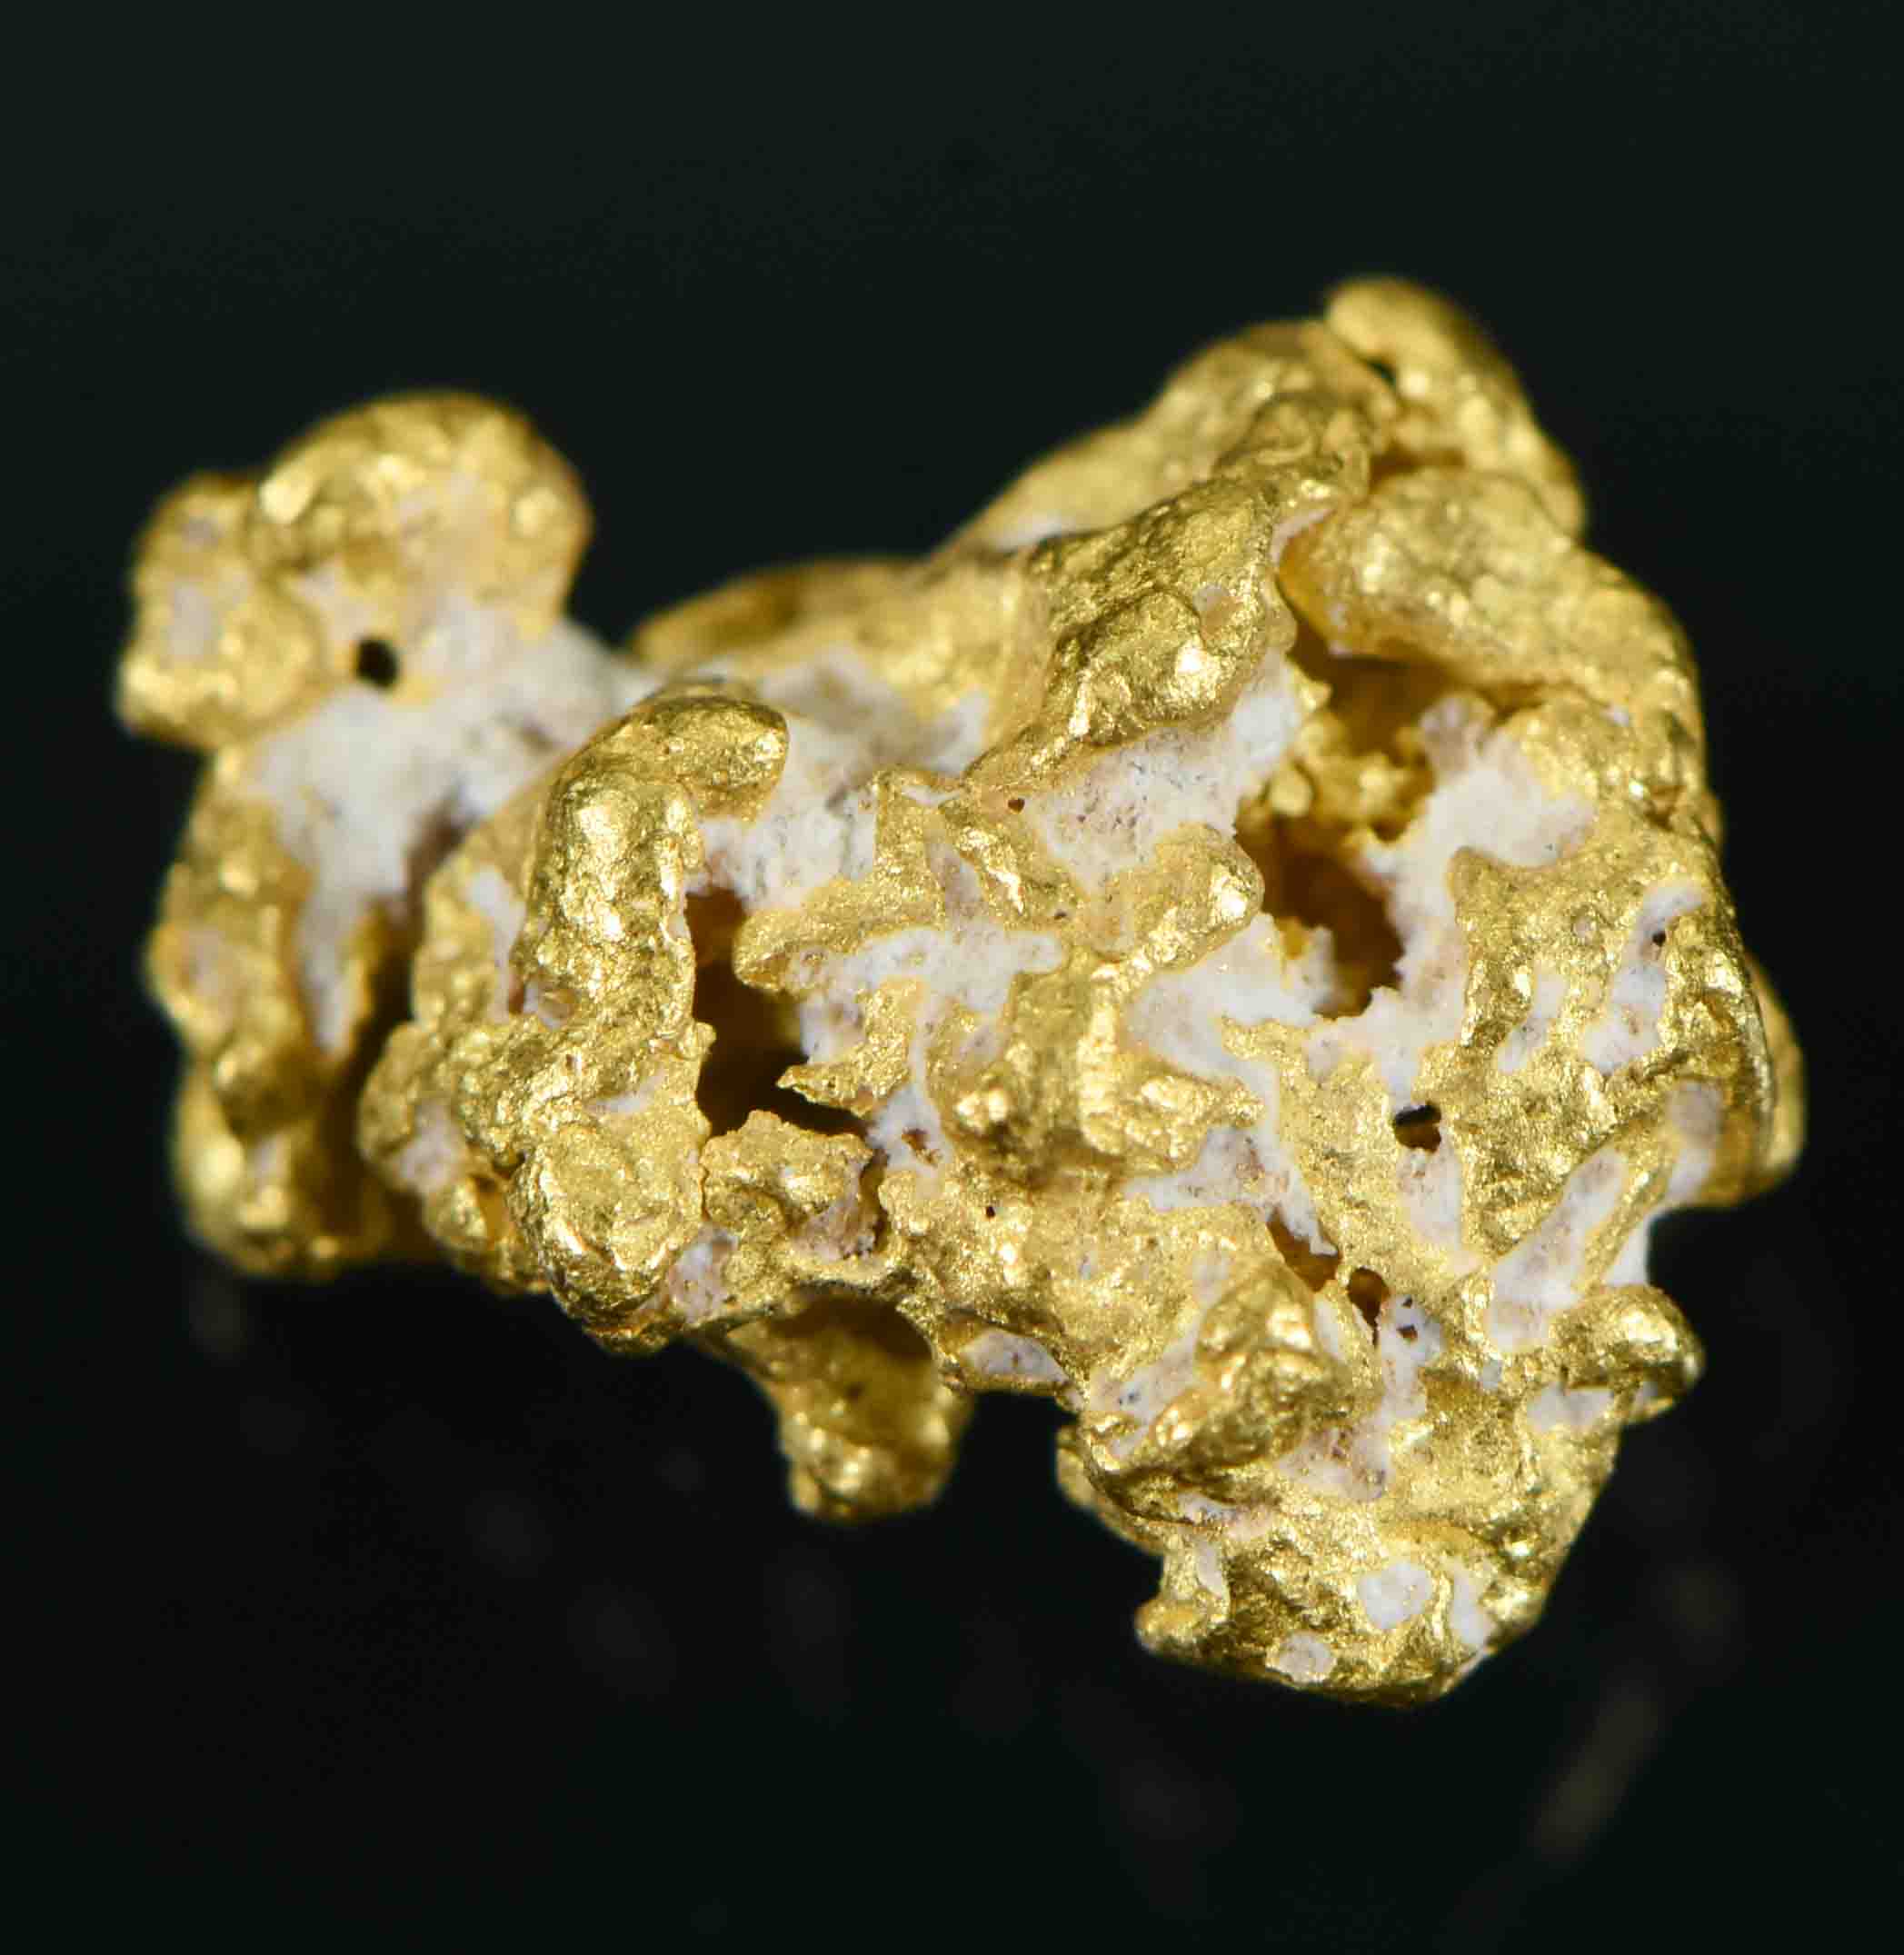 #17 Australian Natural Gold Nugget With Quartz Weighs 1.47 Grams.